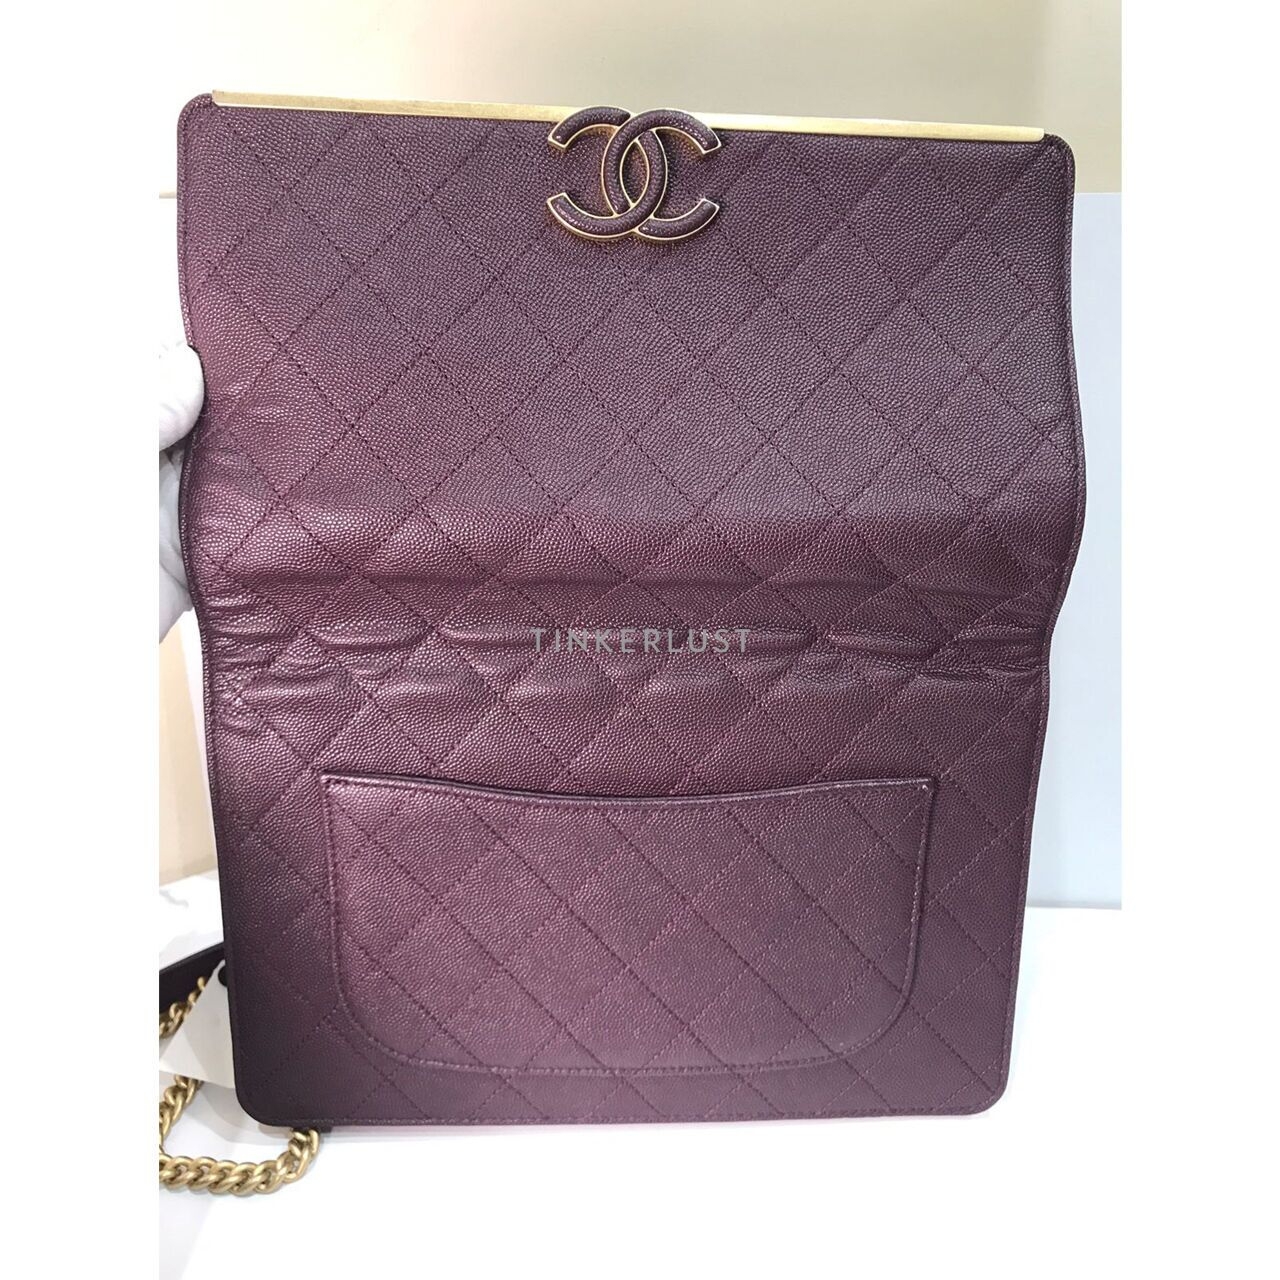 Chanel Lady Coco Flap Quilted Caviar Suede #26 GHW Shoulder Bag